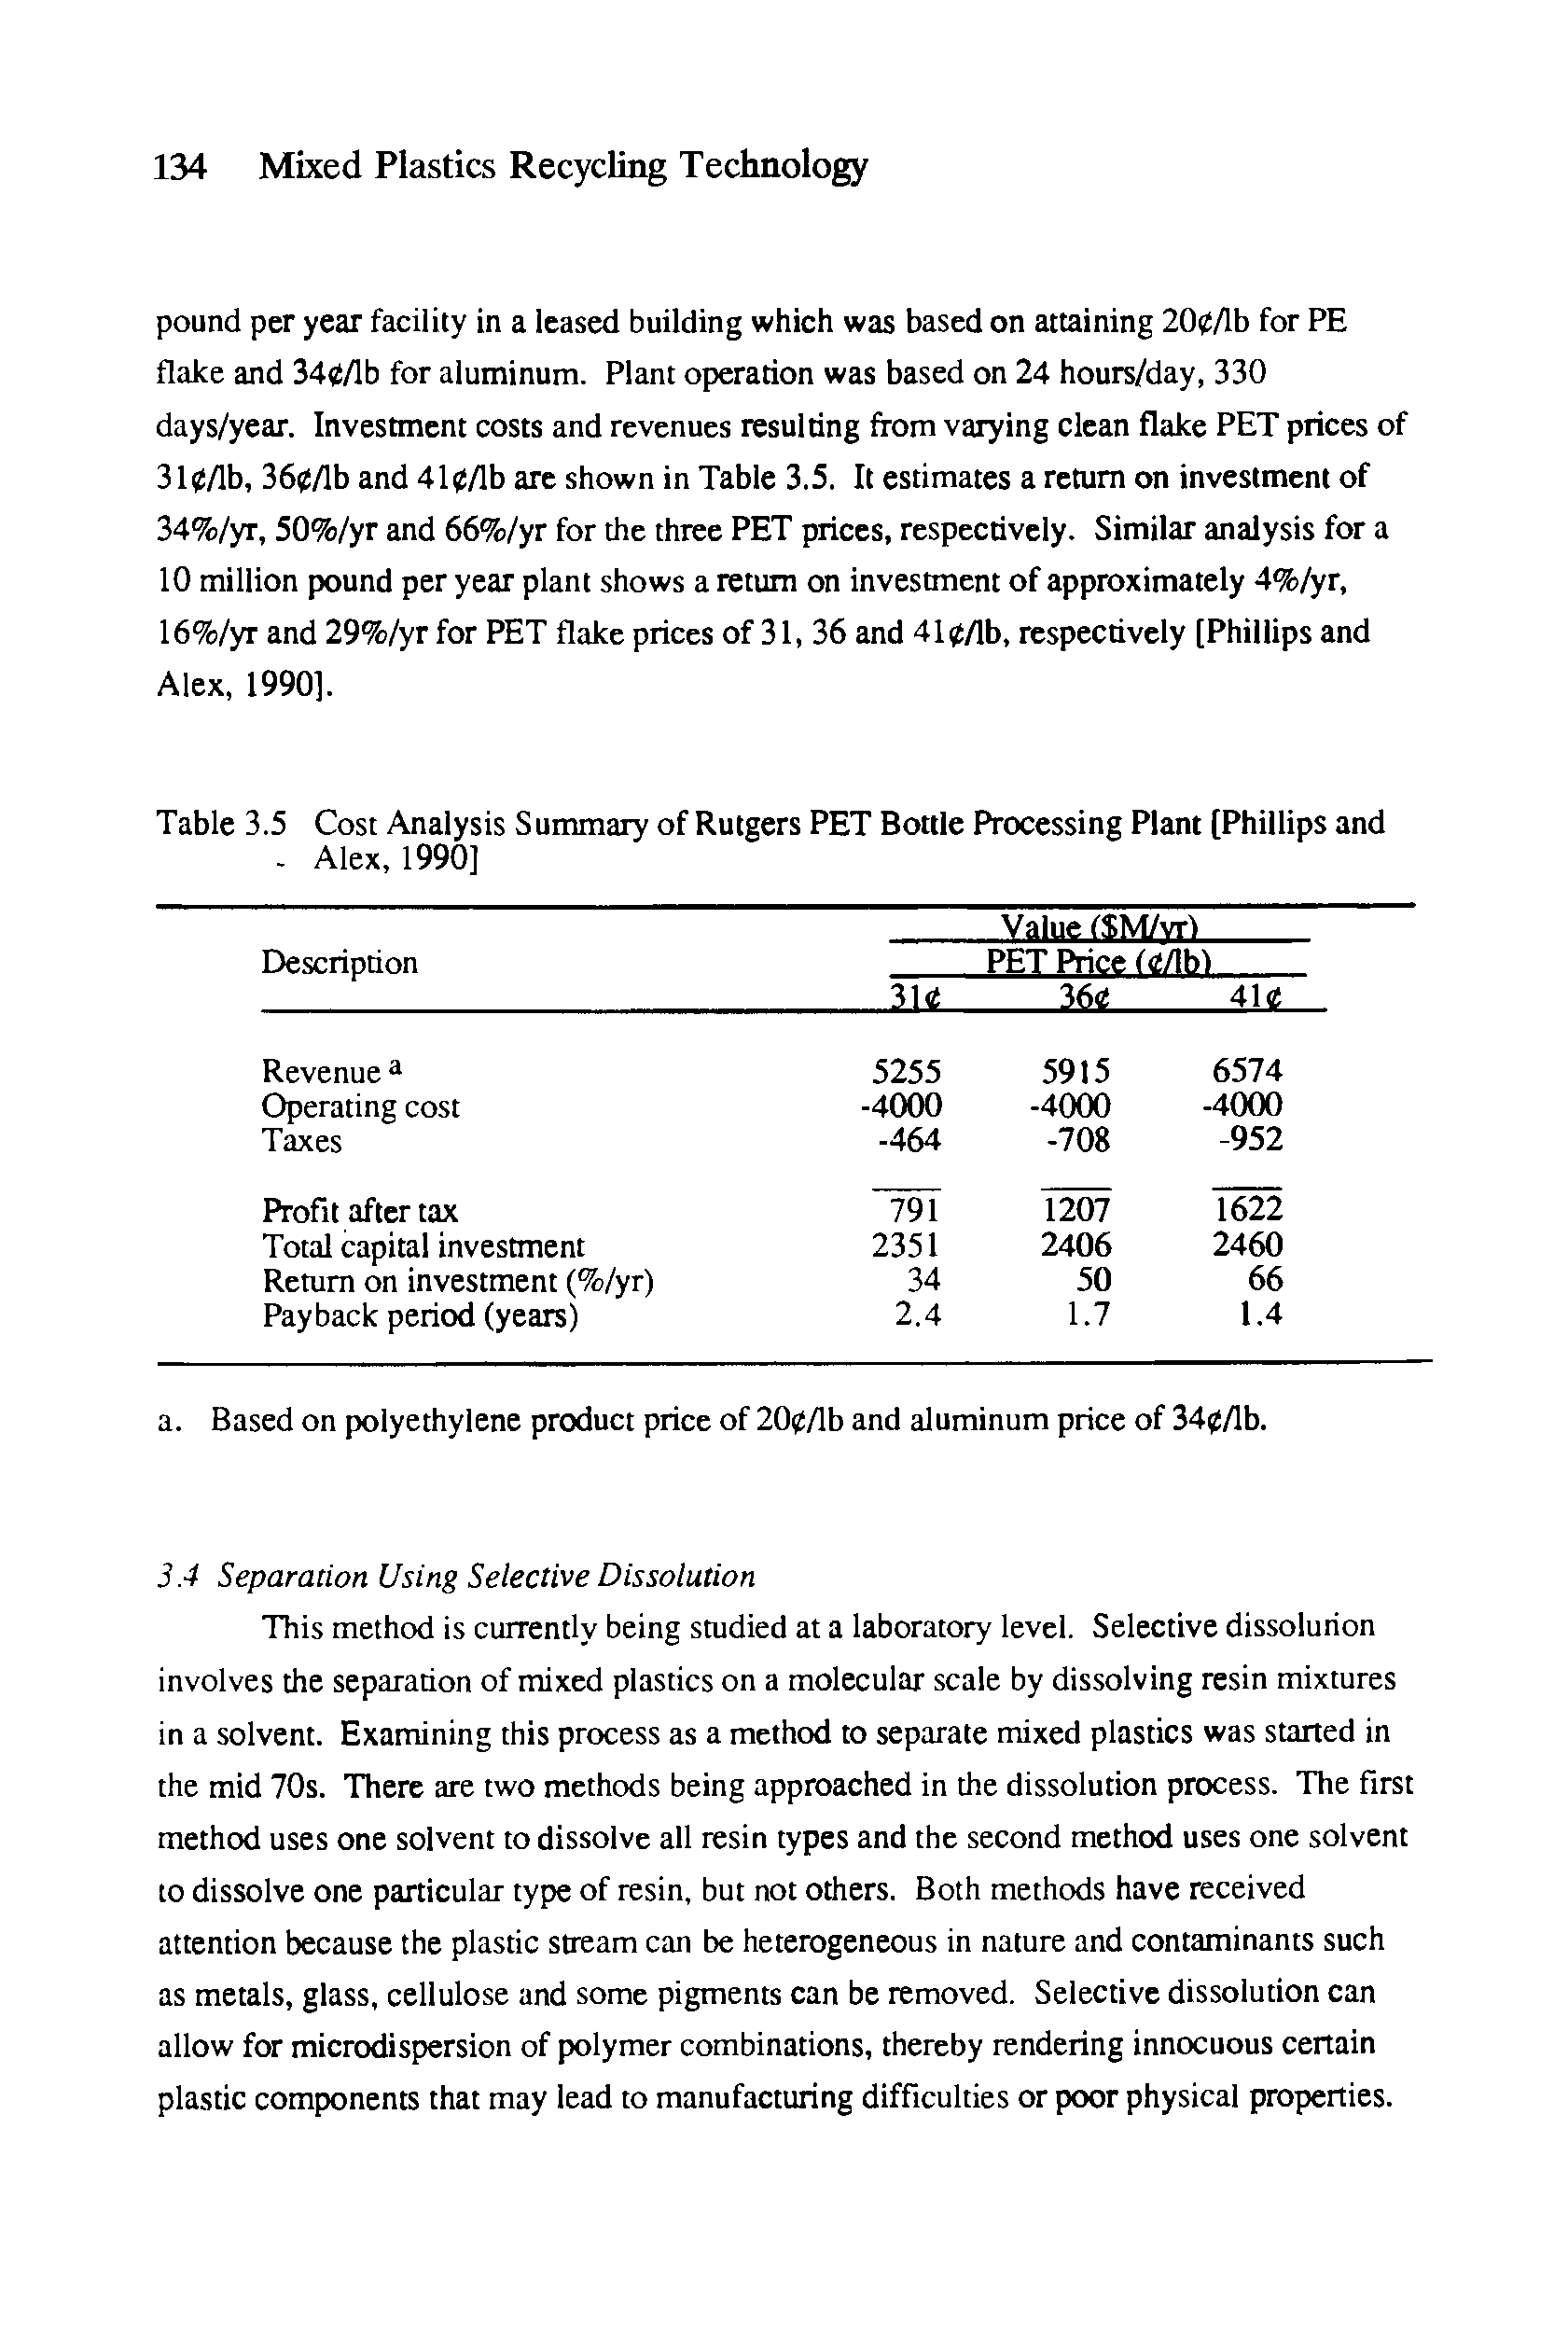 Table 3.5 Cost Analysis Summary of Rutgers PET Bottle Processing Plant (Phillips and - Alex, 1990]...